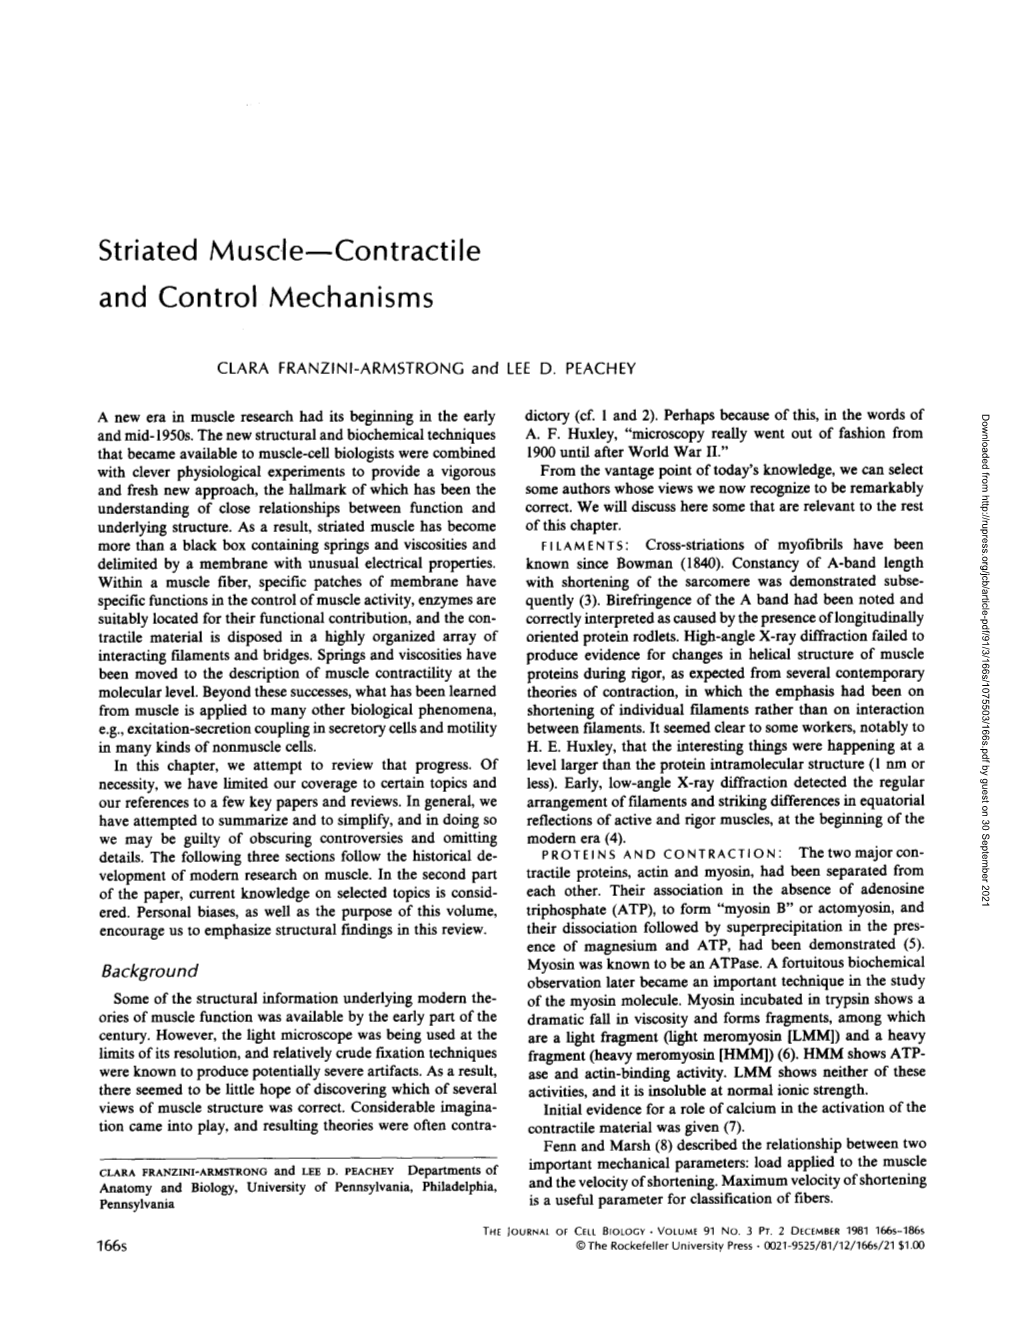 Striated Muscle-Contractile and Control Mechanisms